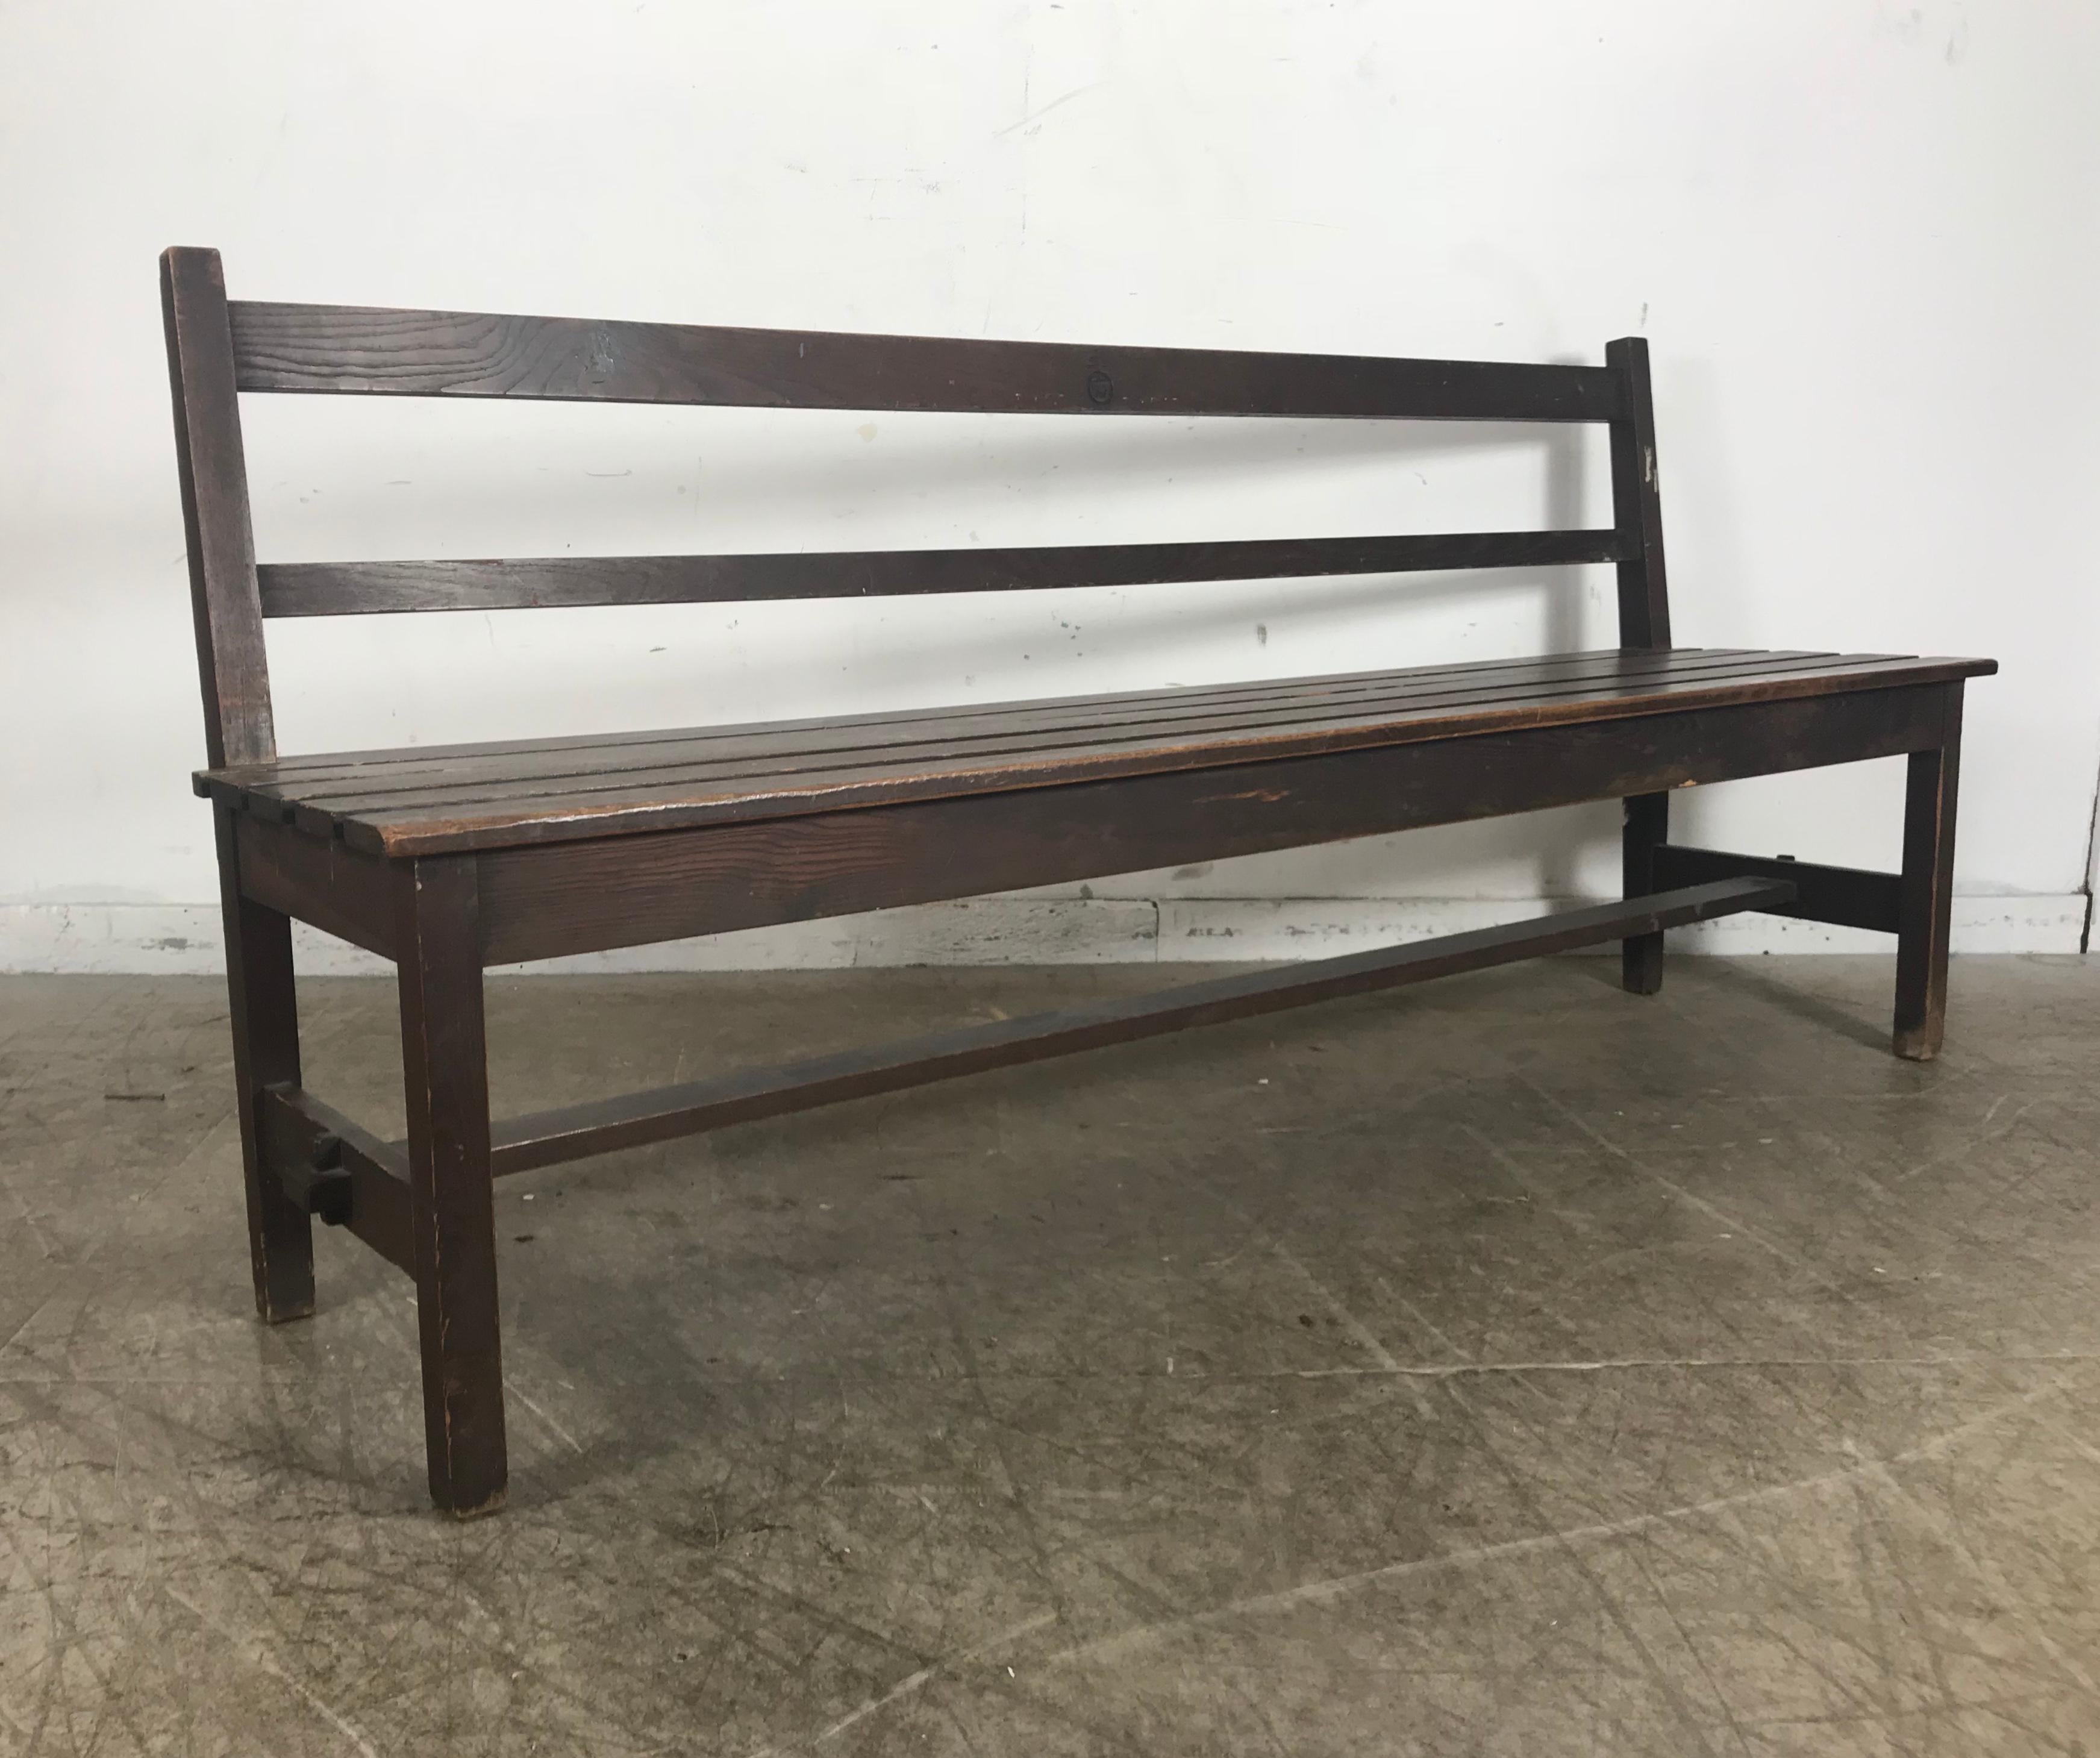 Rare Pair of Roycroft Oak Benches, Inventory Number from the Inn, circa 1905 For Sale 6